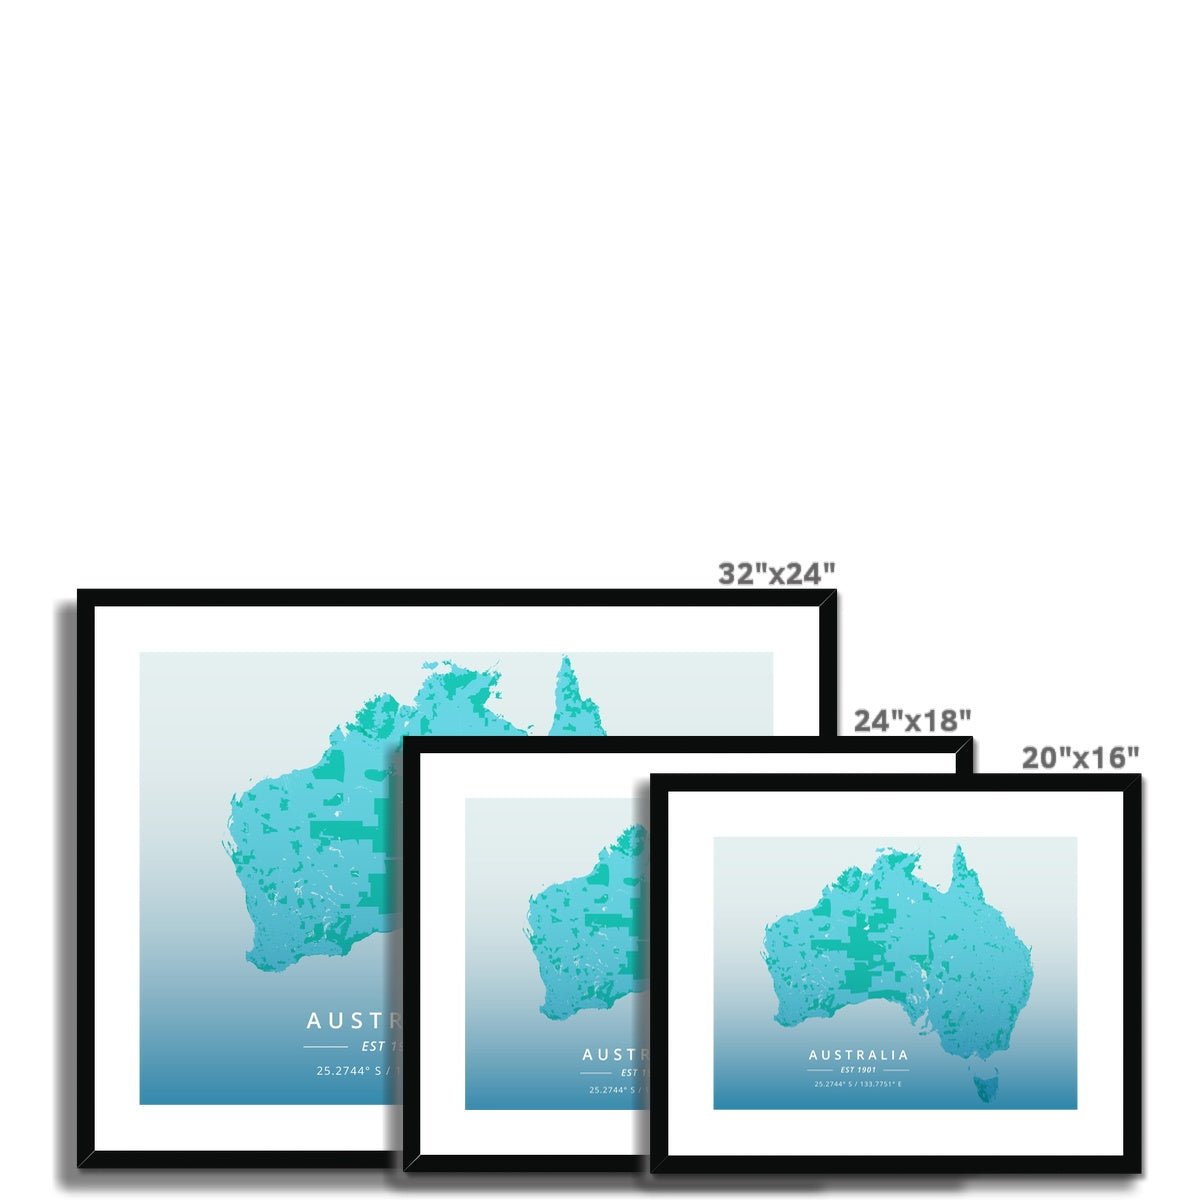 Chilled - Australia 5 - Map Matte Print by doingly